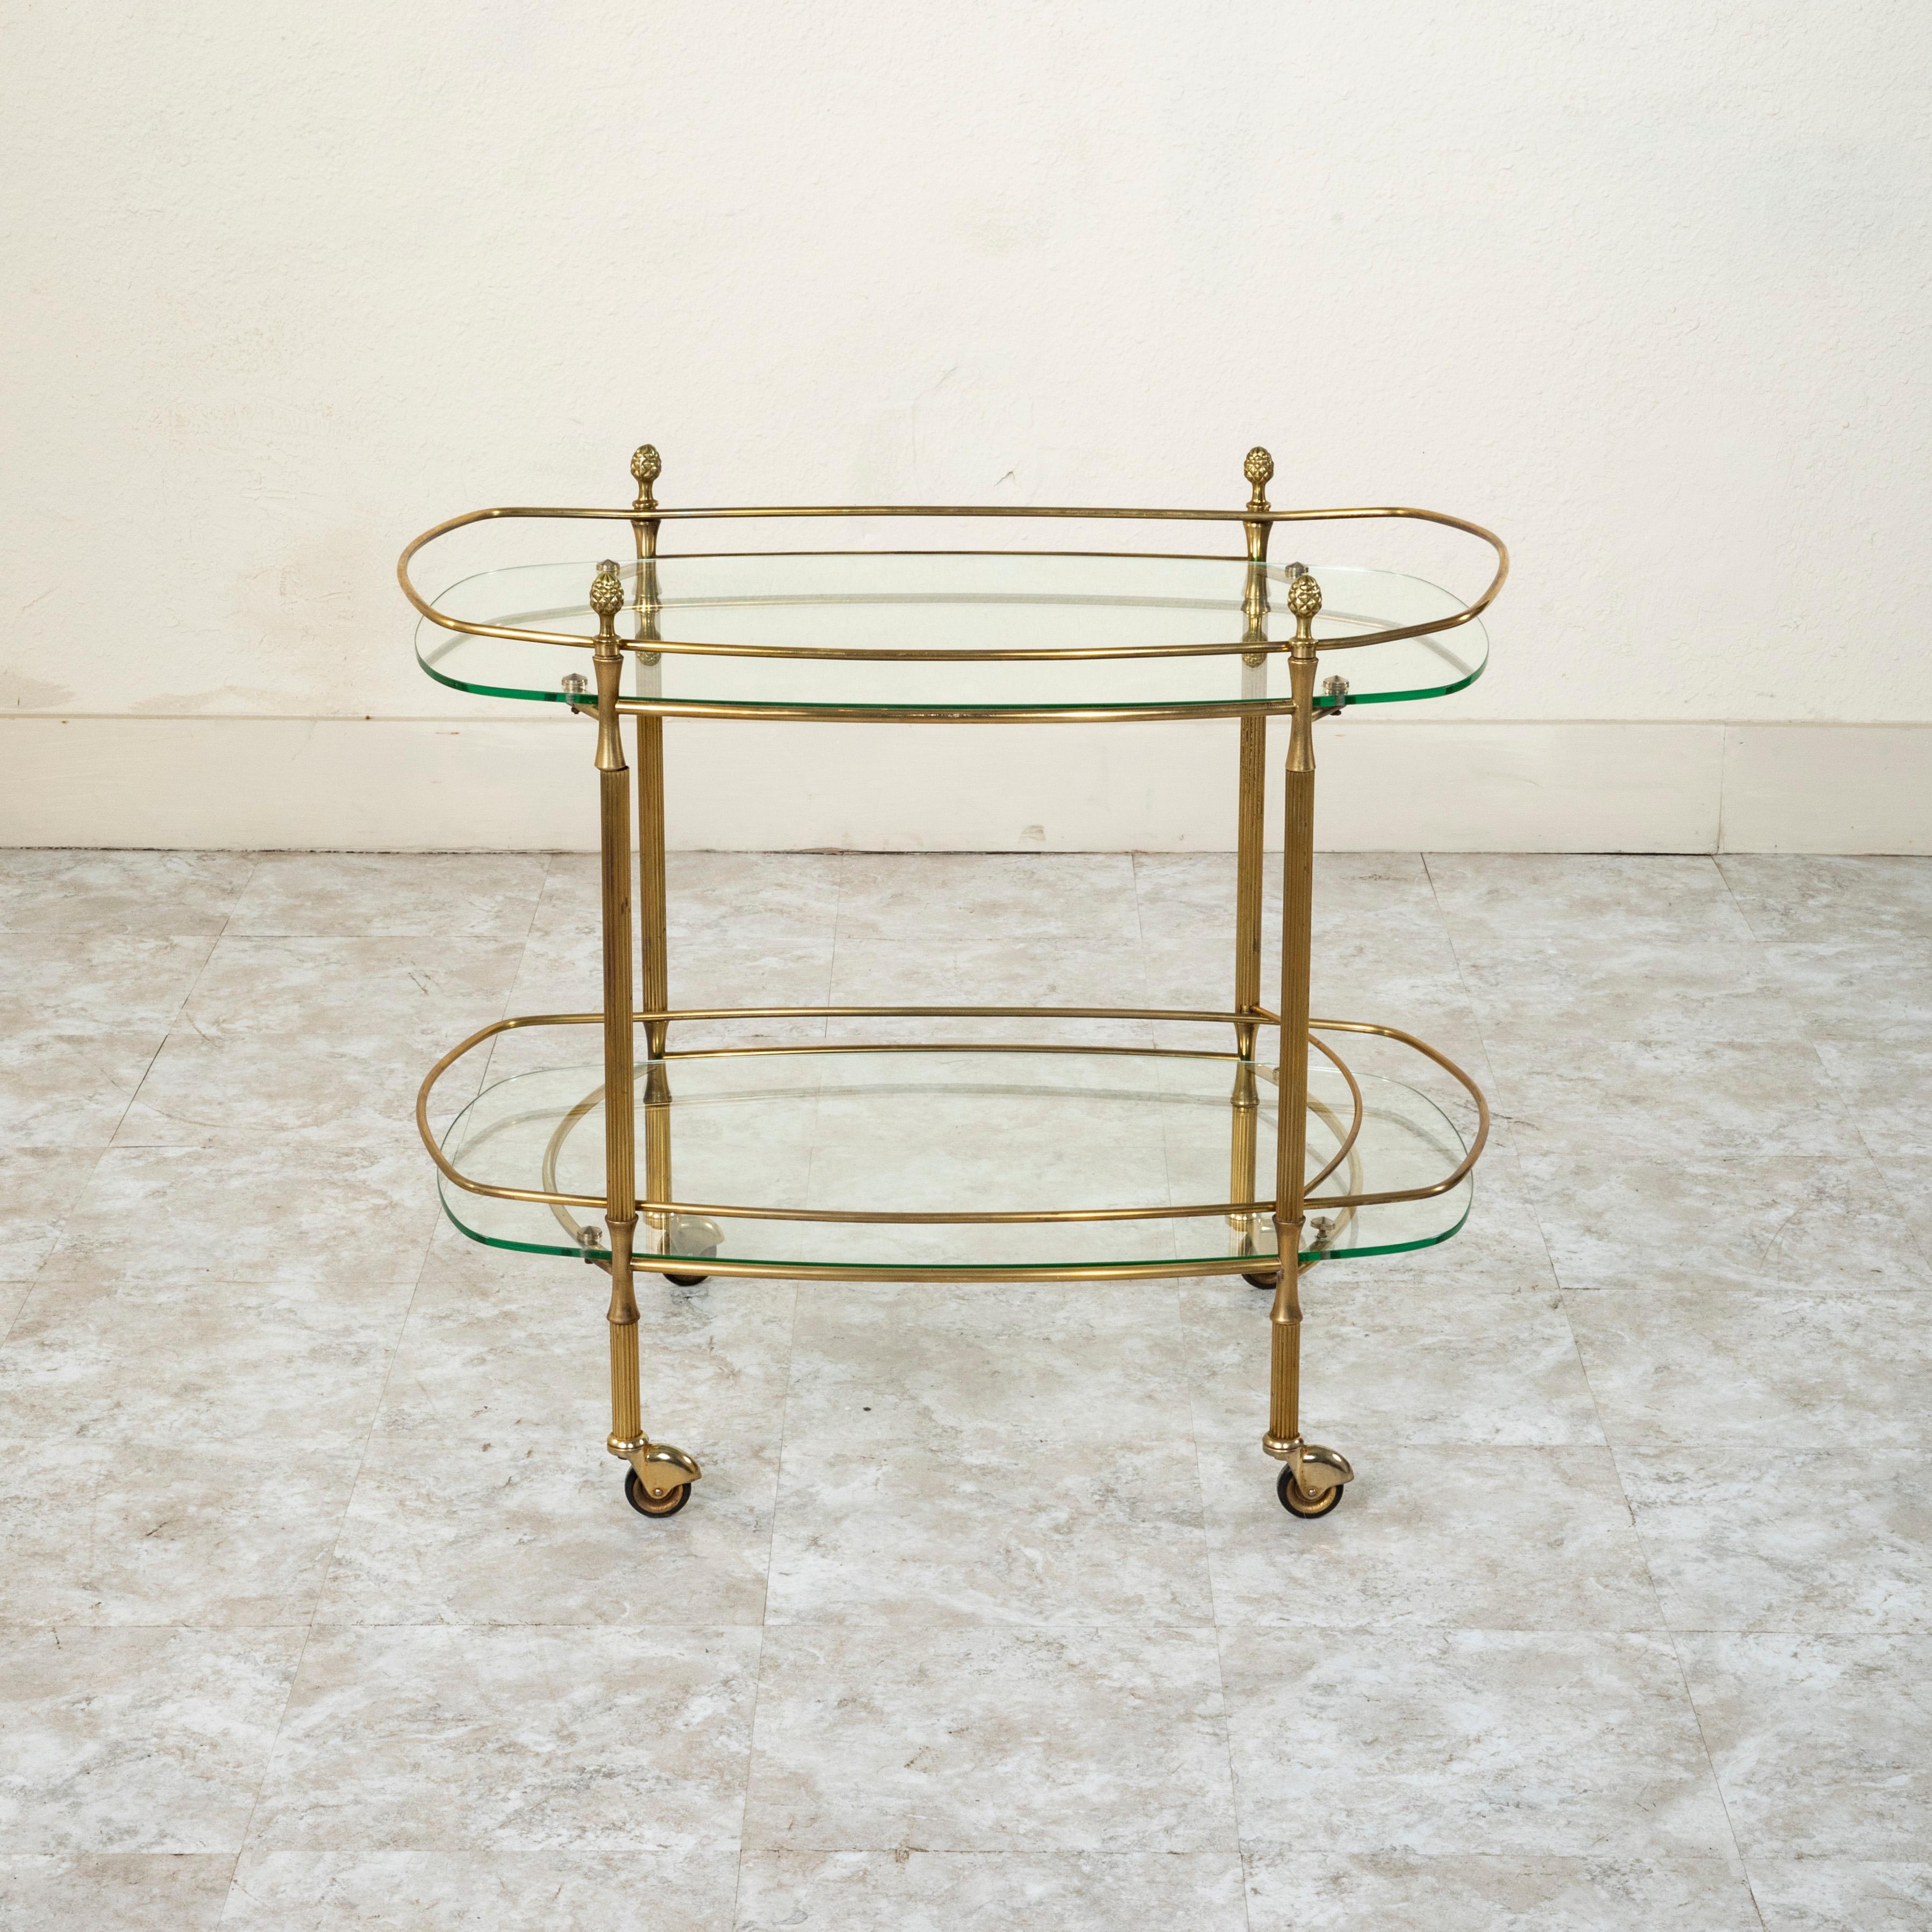 This mid-century French Louis XVI style brass bar cart features fluted columns capped with classic pinecone finials. The piece is fitted with two glass shelves each surrounded by a brass rail. The lower shelf is fitted with an additional bar that